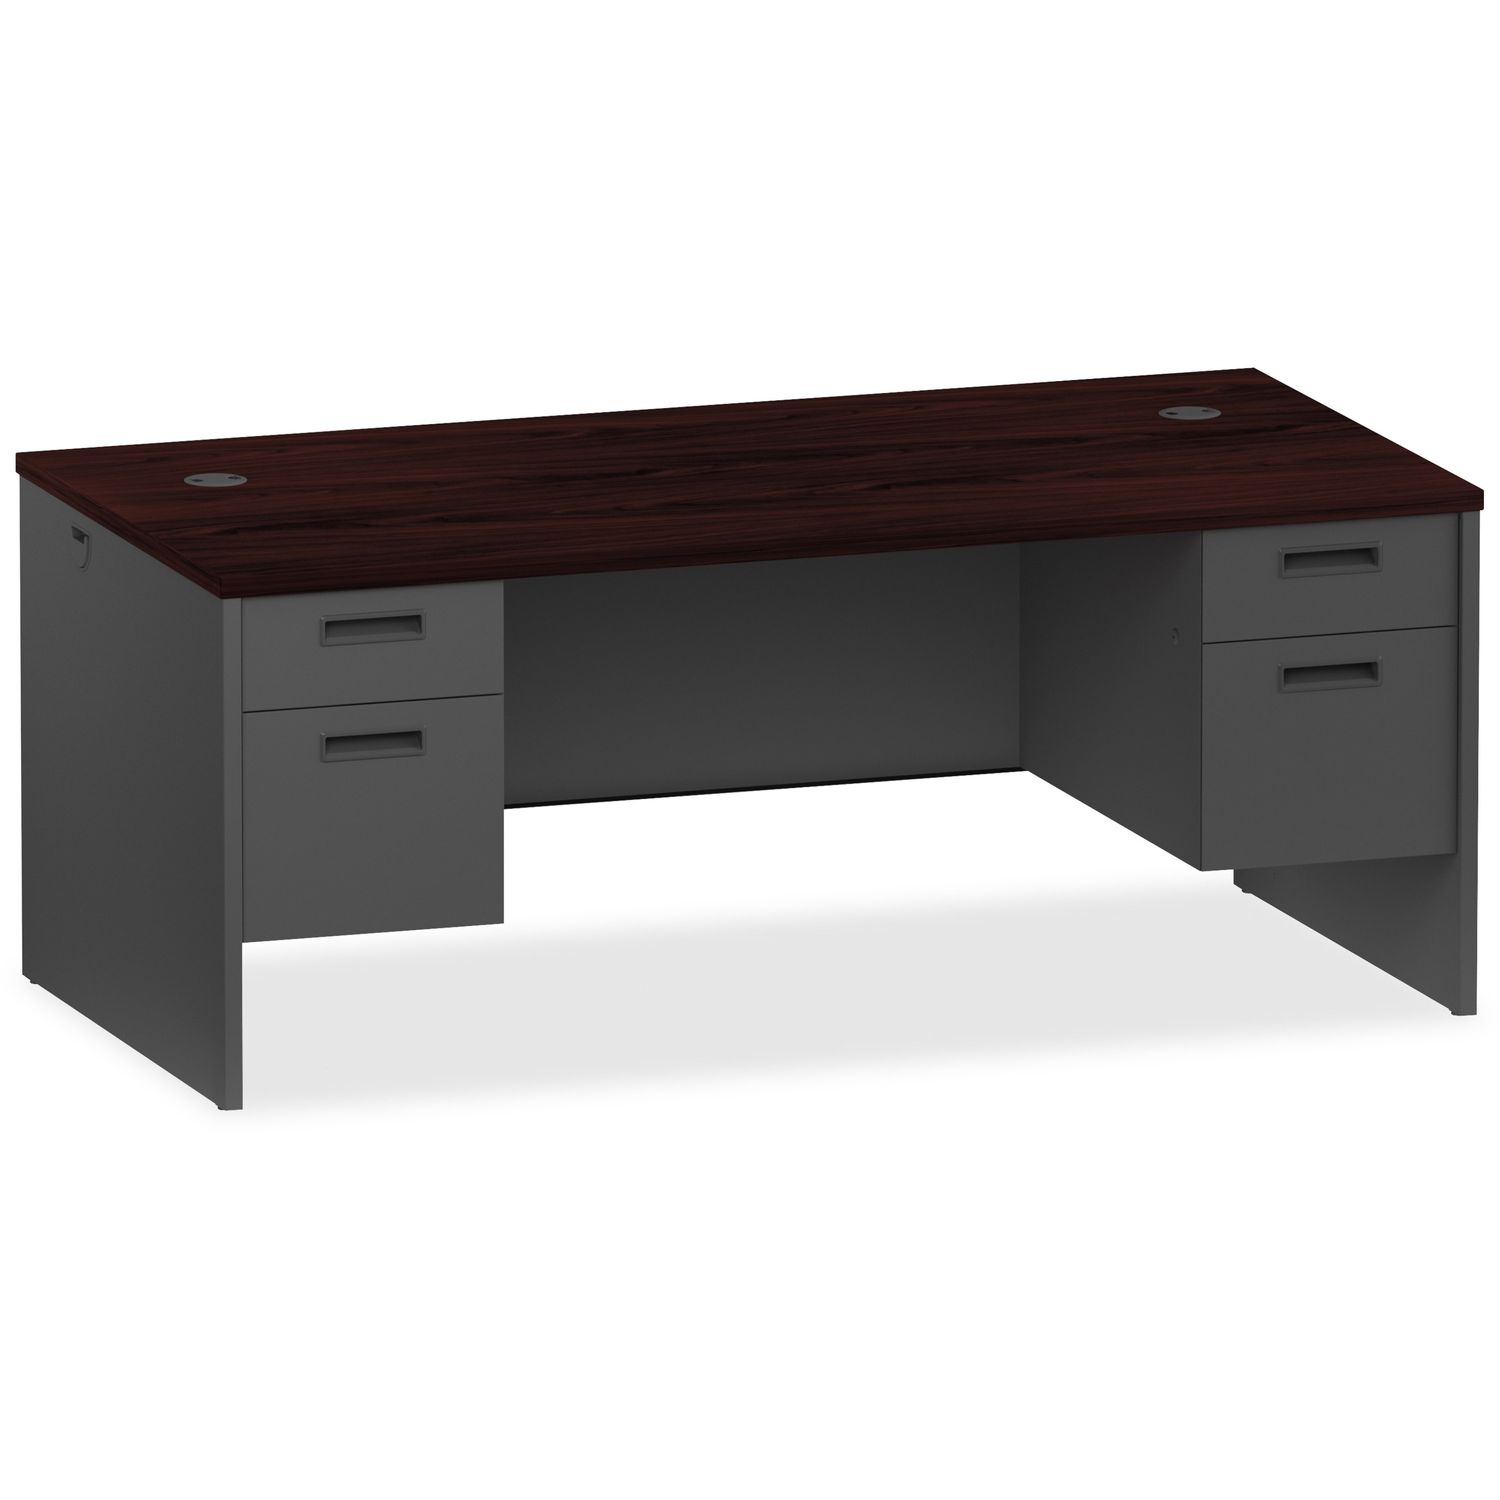 Mahogany/Charcoal Pedestal Desk - 2-Drawer 72" x 36" x 29.5", 2 x Box Drawer(s), File Drawer(s), Double Pedestal, Material: Steel, Finish: Mahogany, Charcoal